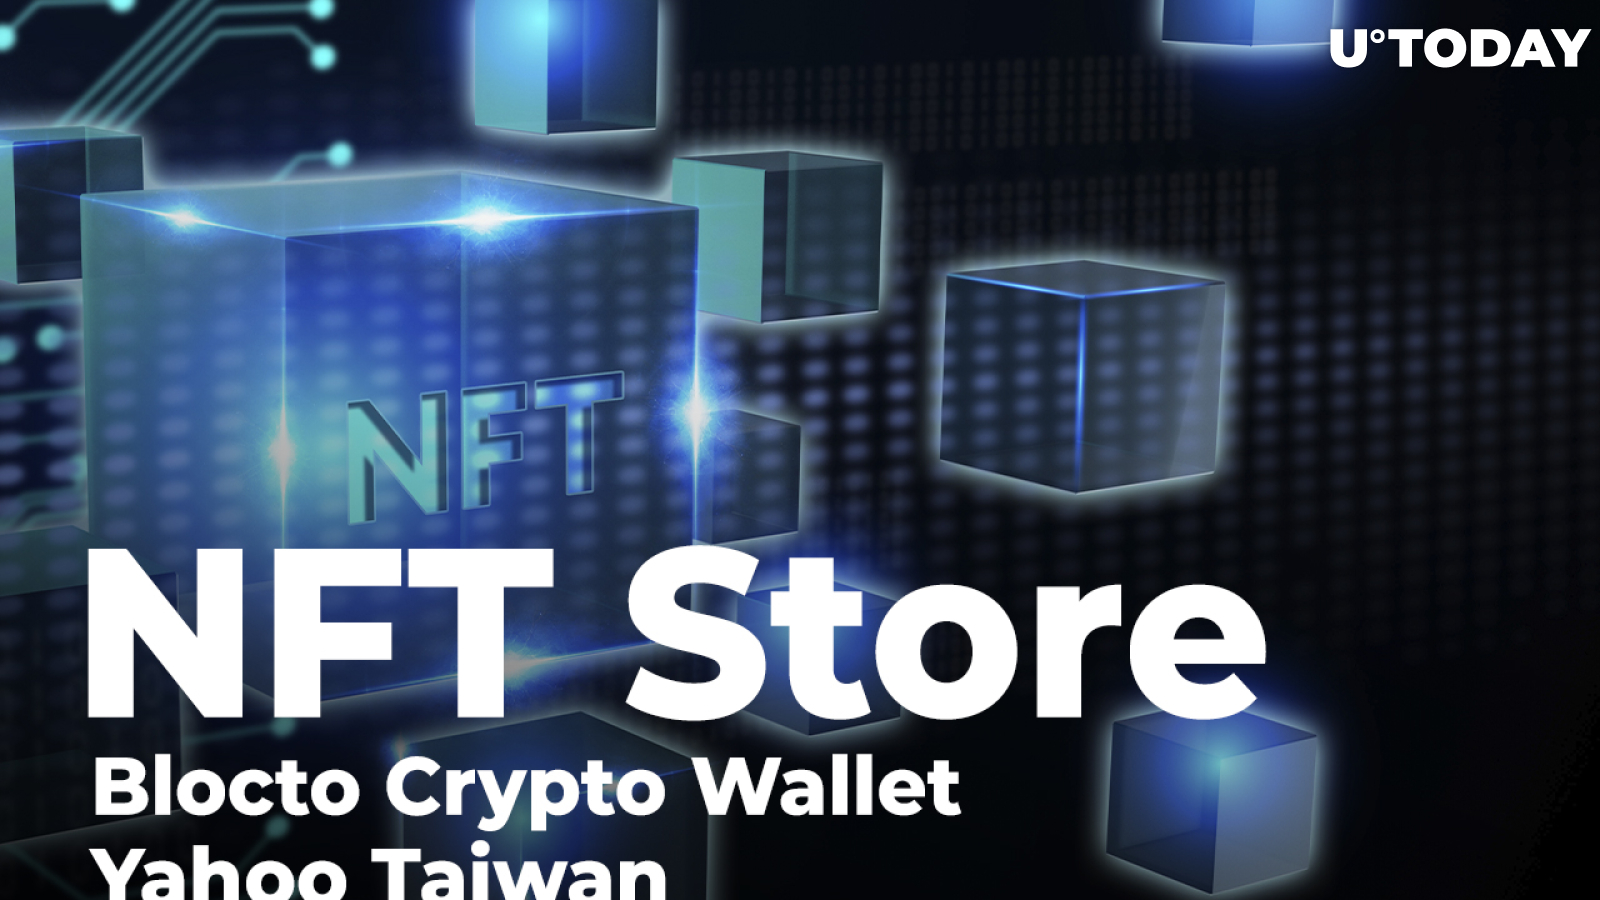 Blocto Crypto Wallet to Launch NFT Store Together with Yahoo Taiwan